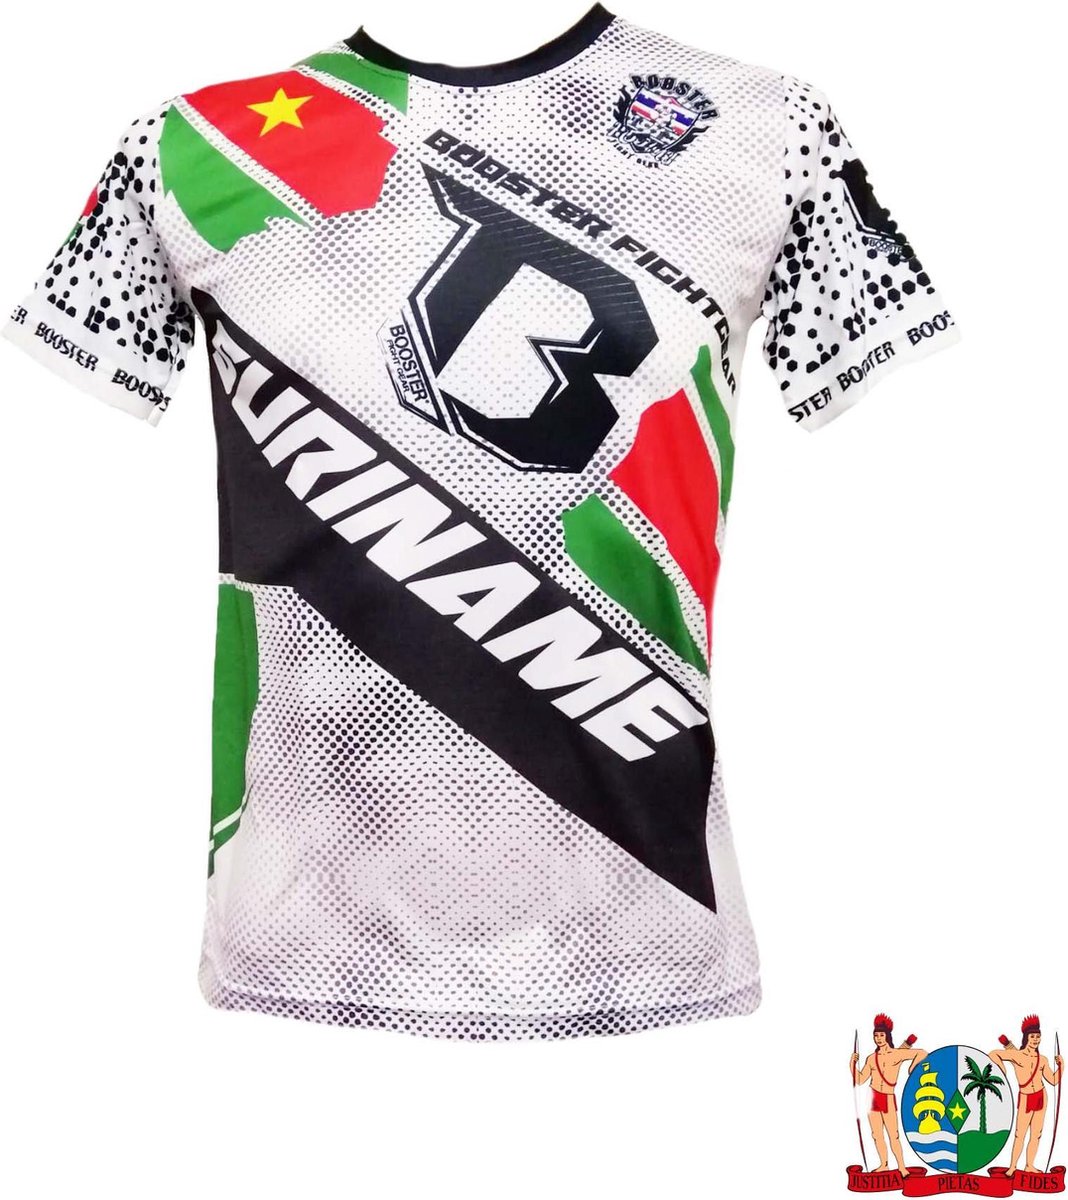 Booster Fightgear - Suriname Fightset